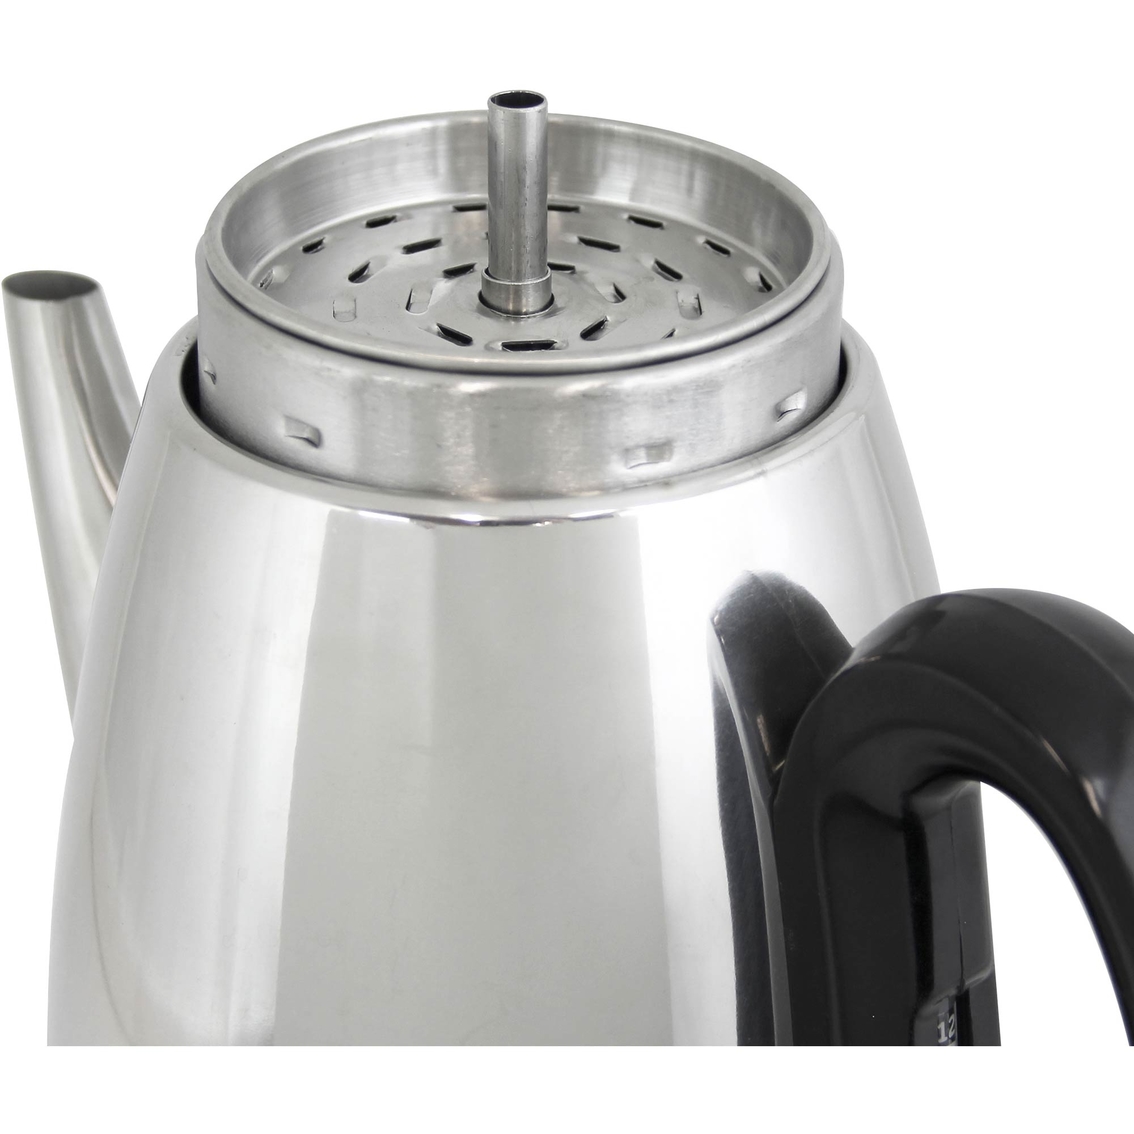 West Bend 12 Cup Stainless Steel Percolator - Image 2 of 6